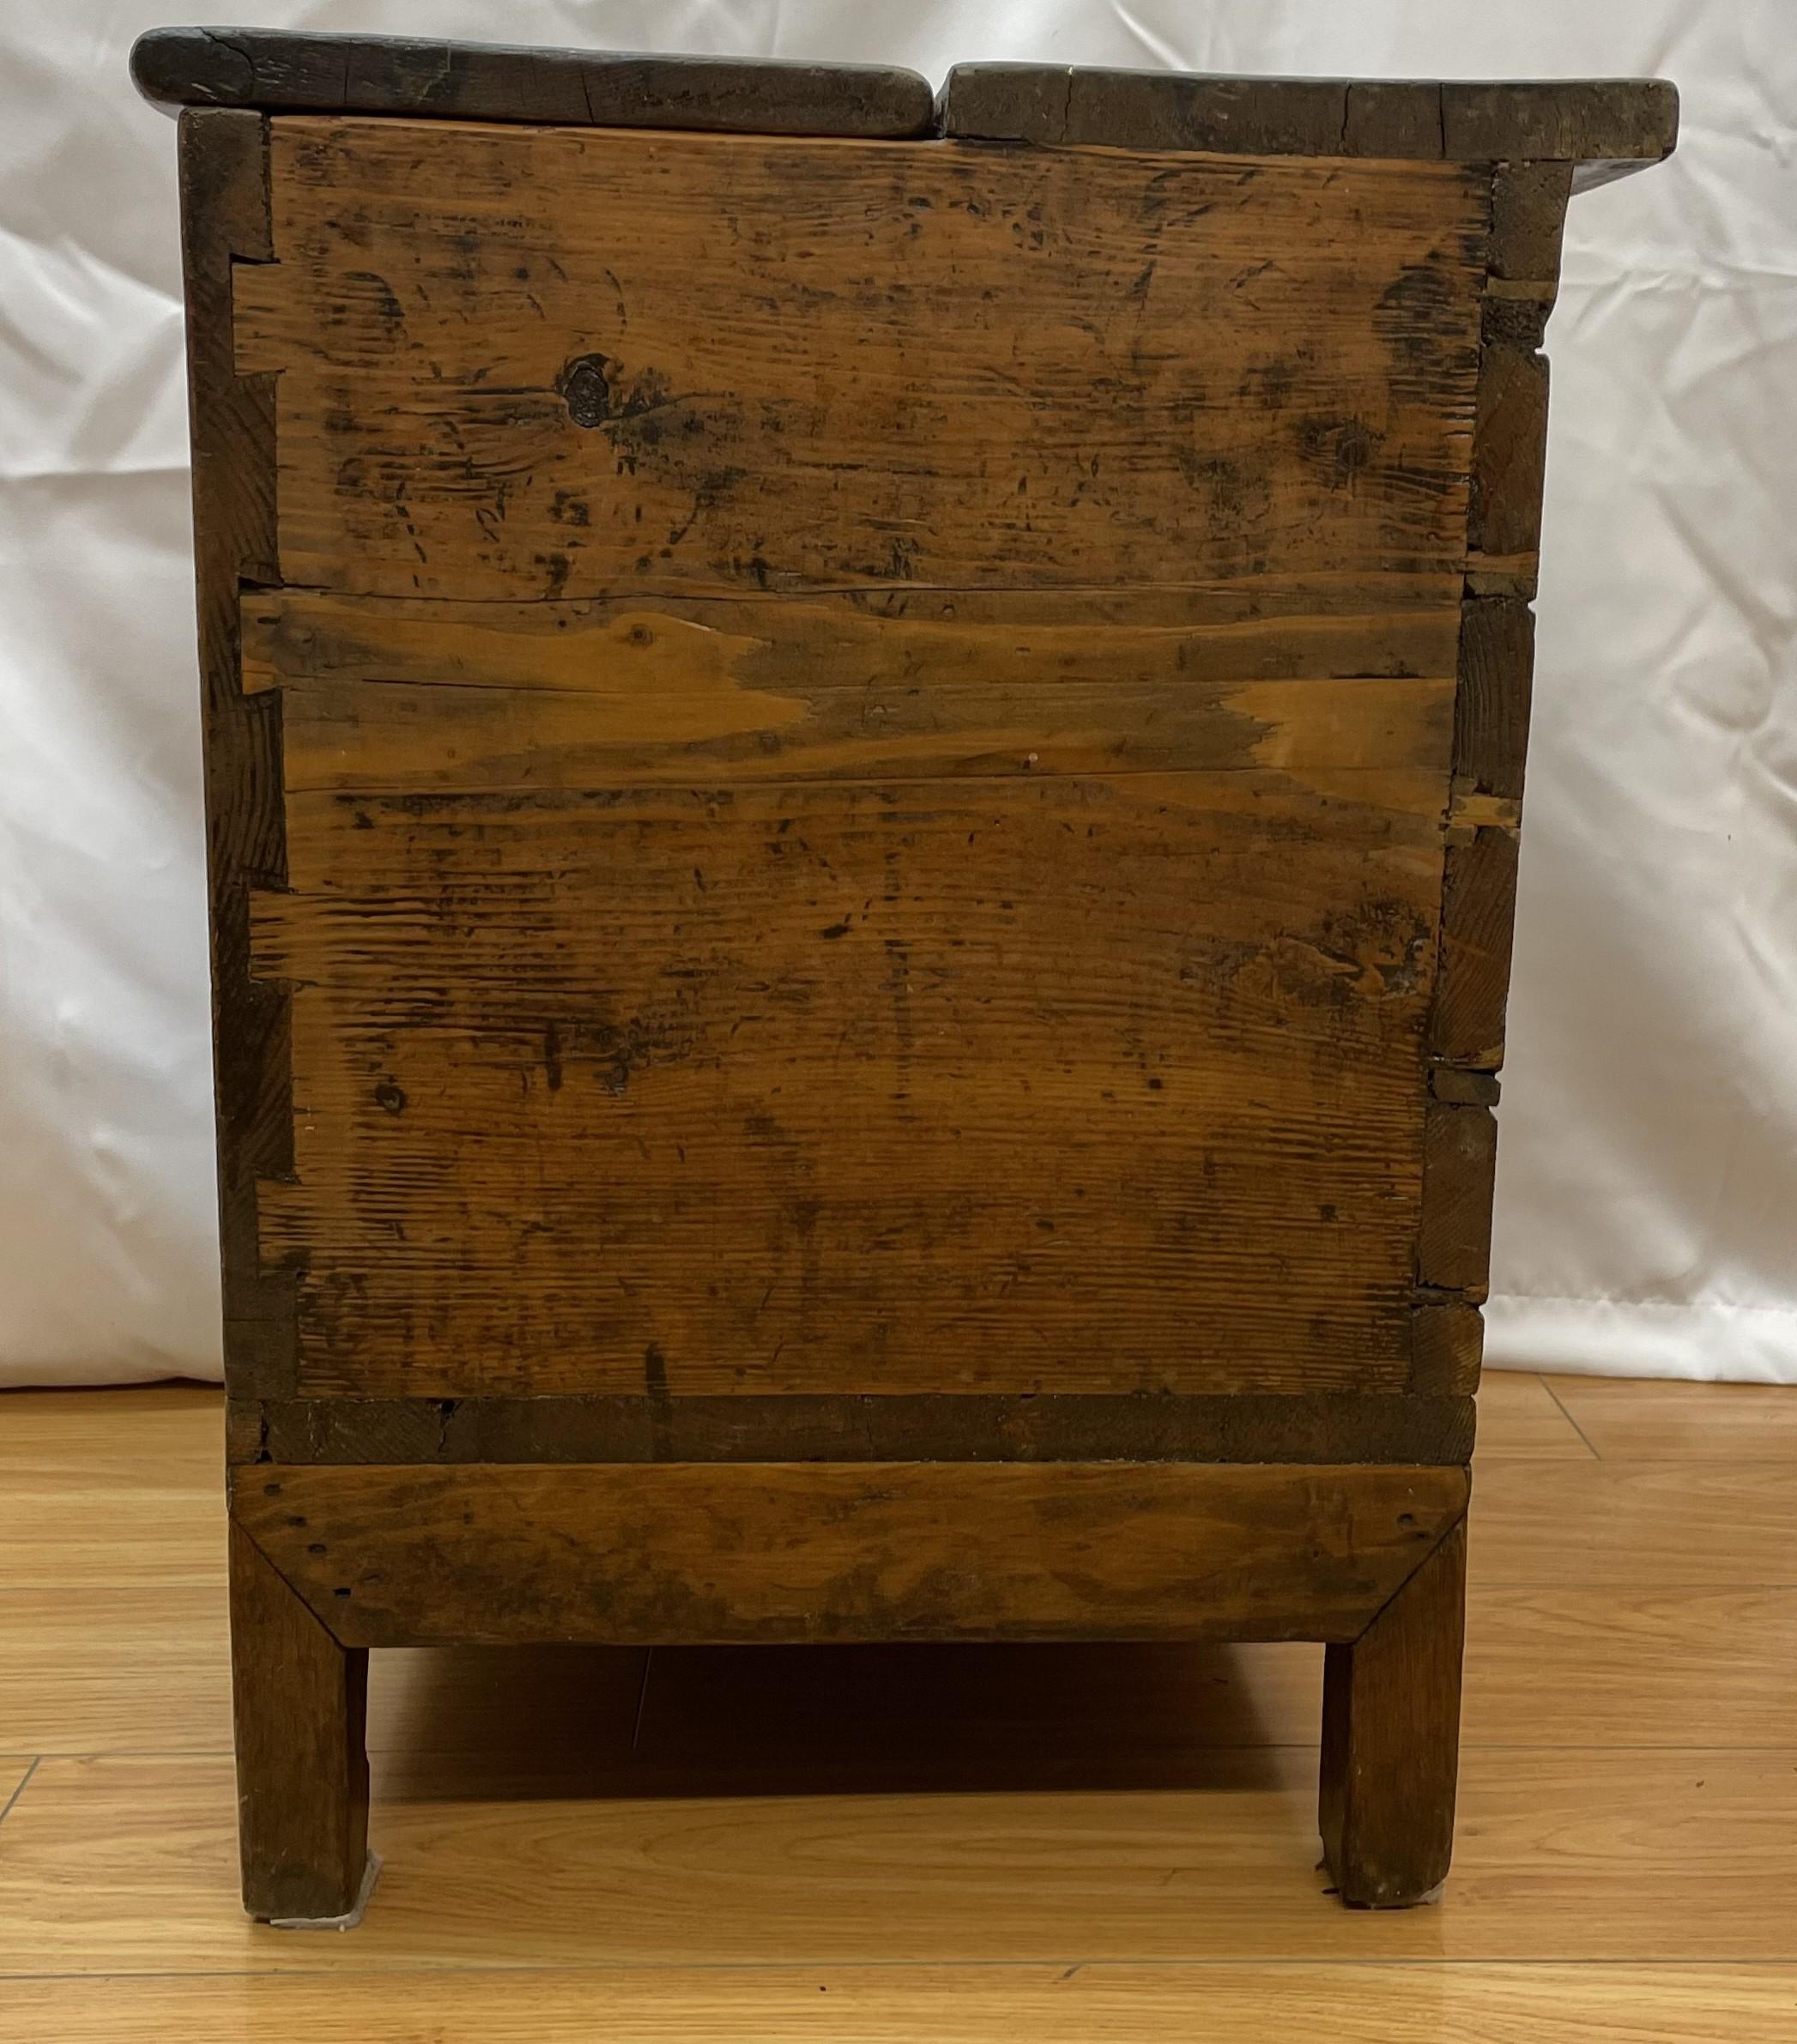 Wood 18th - 19th century sugar chest For Sale